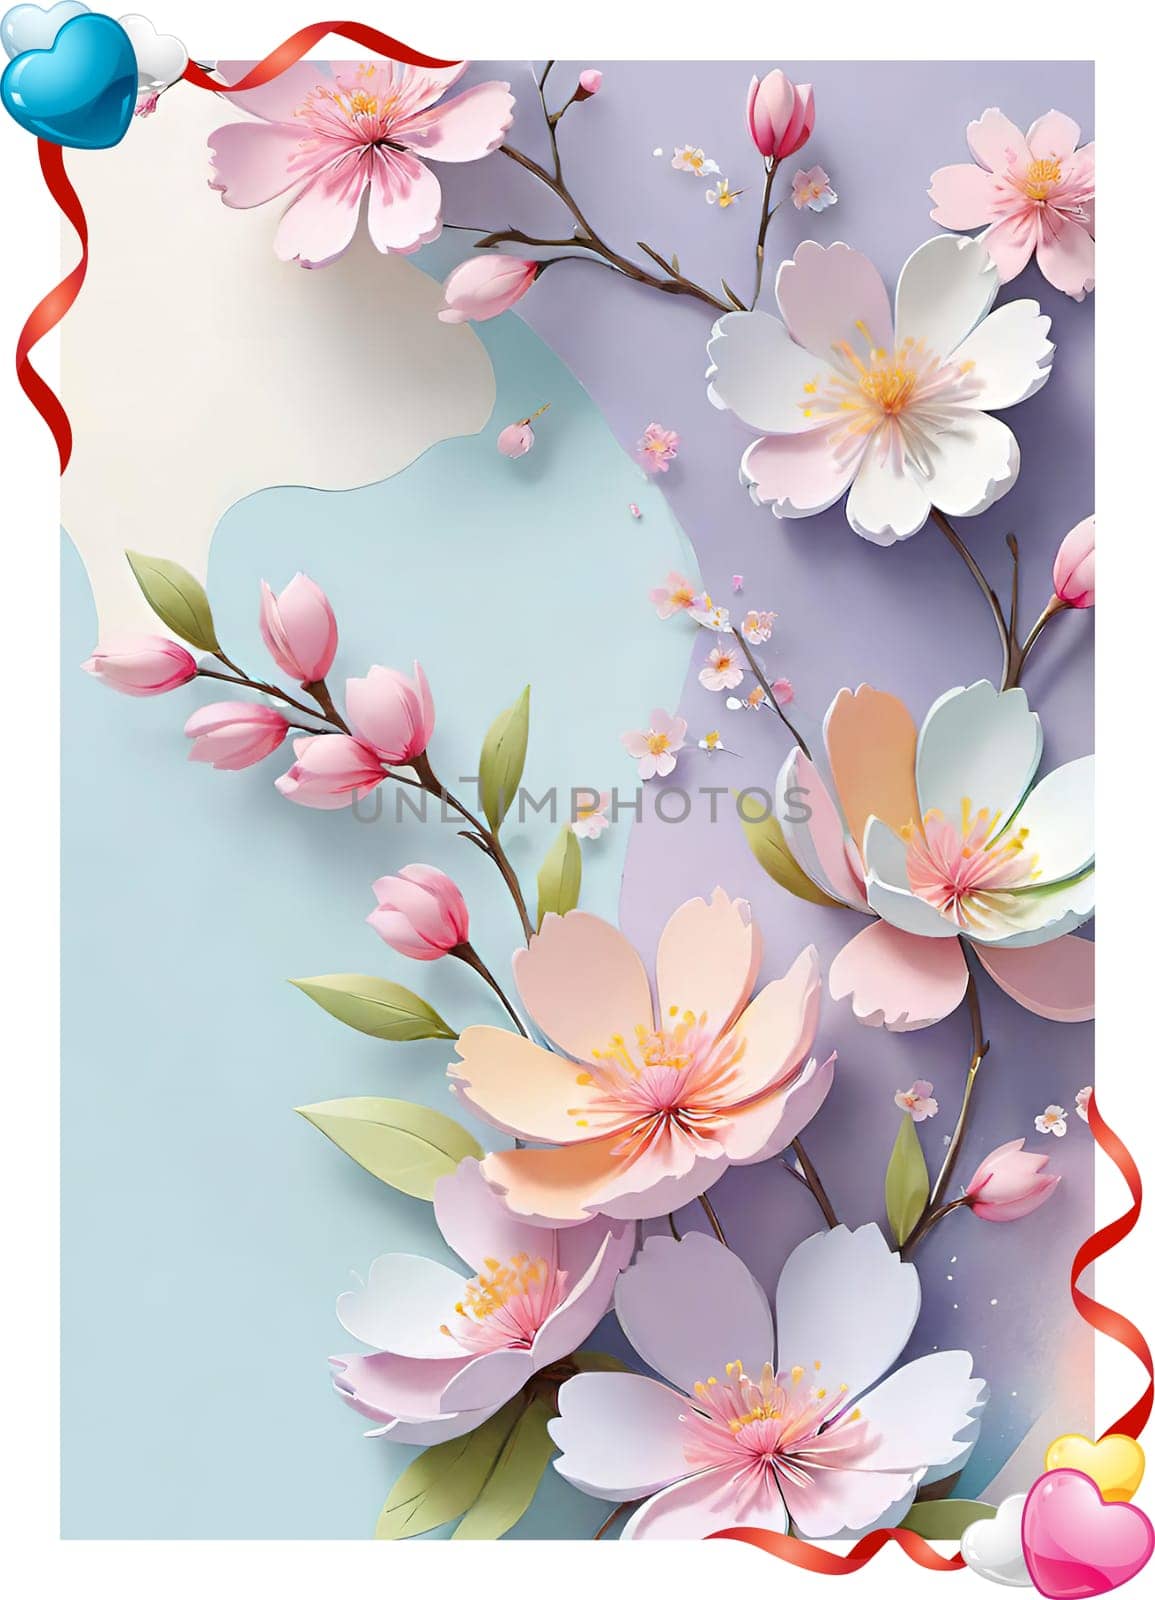 Cherry blossom frame on pastel background with space for text. Sakura.Paper art of Cherry blossom with frame on pastel background.Paper cut style.Spring background with sakura flowers and leaves. Vector paper illustration.3d rendering.Spring flowers frame with copy space for your text. Pastel colors.Minimal style.İnvitation and celebrations.